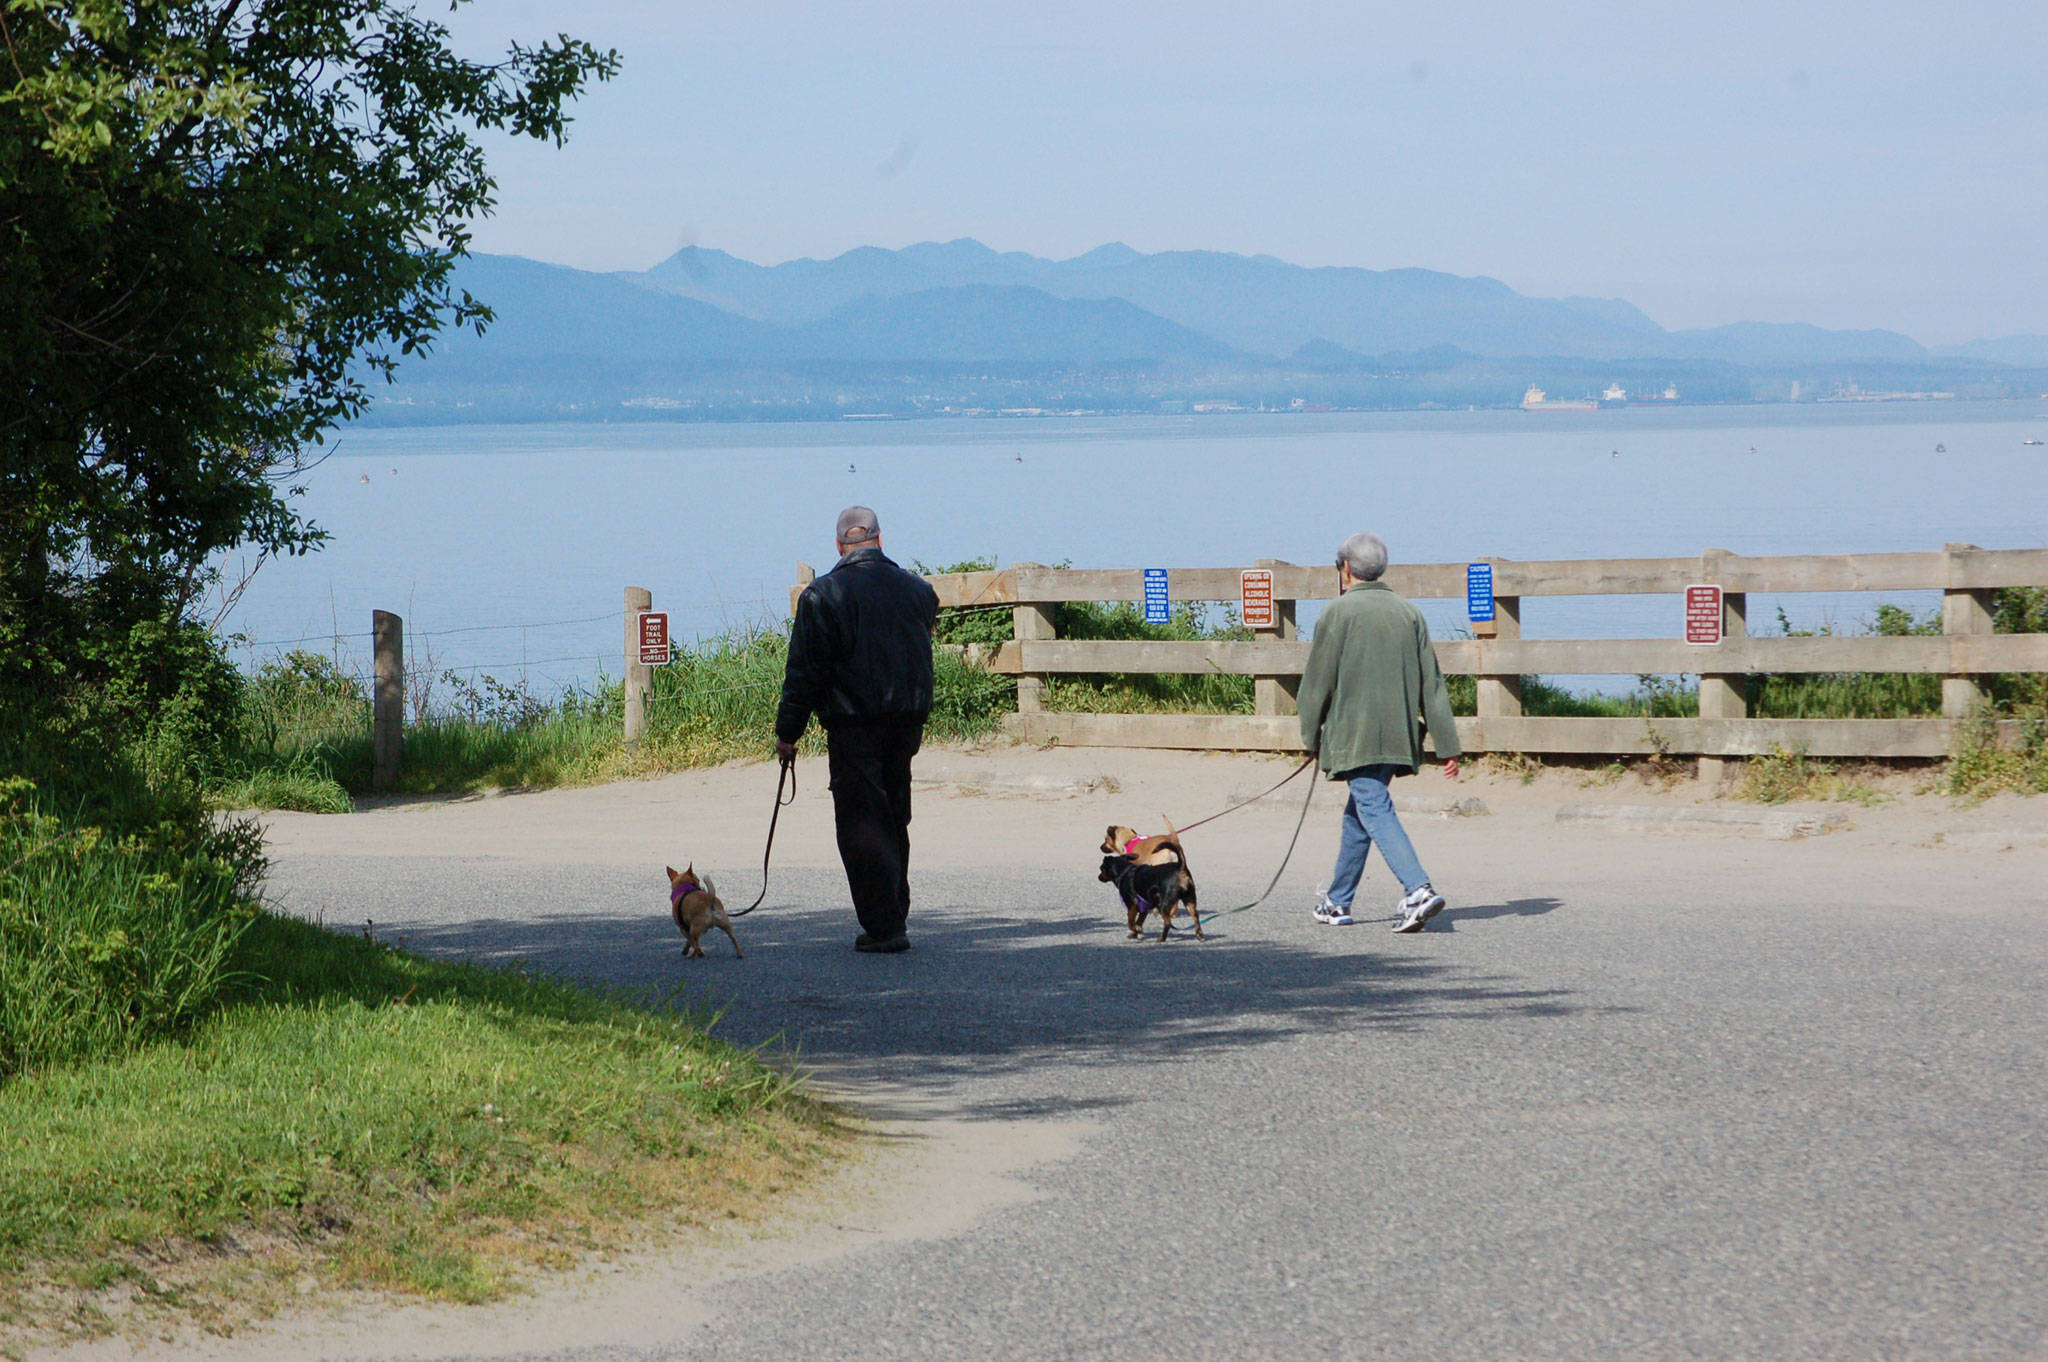 Day users walk the Dungeness Recreation Area where the Parks and Recreation Advisory Board approved to recommend to County Commissioners that they move forward with Phase 1 of its Preferred Master Plan, which provides improvements to existing amenities and facilities throughout the Park. Sequim Gazette photo by Erin Hawkins